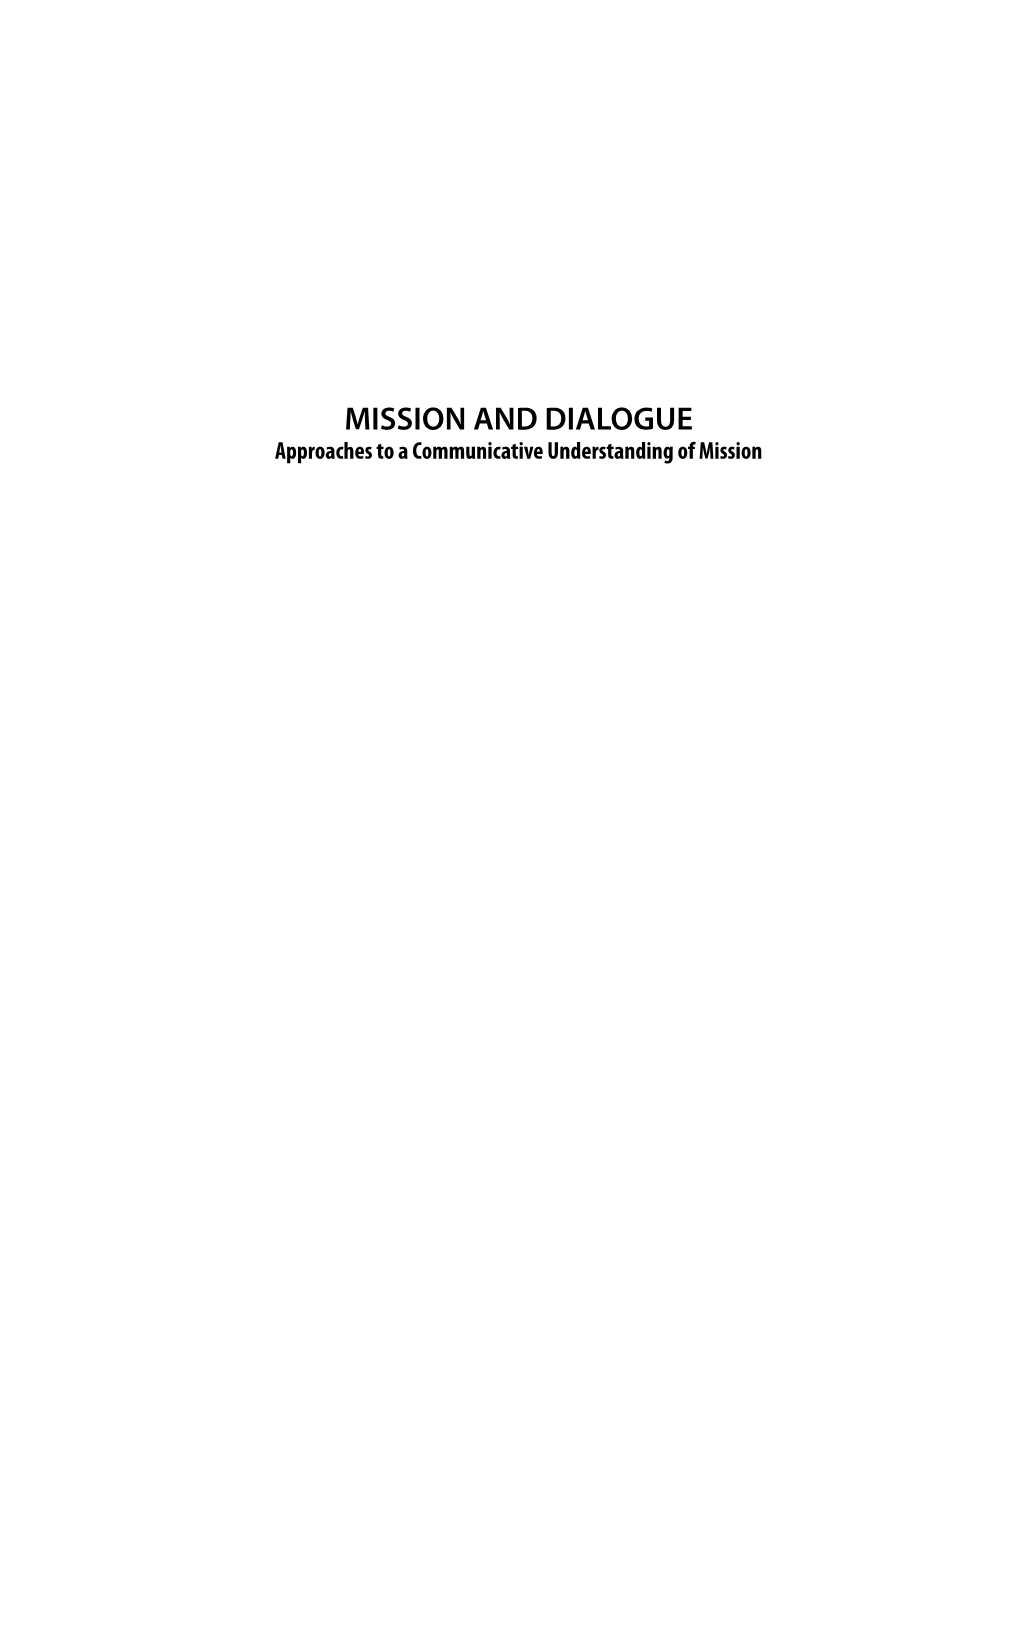 MISSION and DIALOGUE Approaches to a Communicative Understanding of Mission